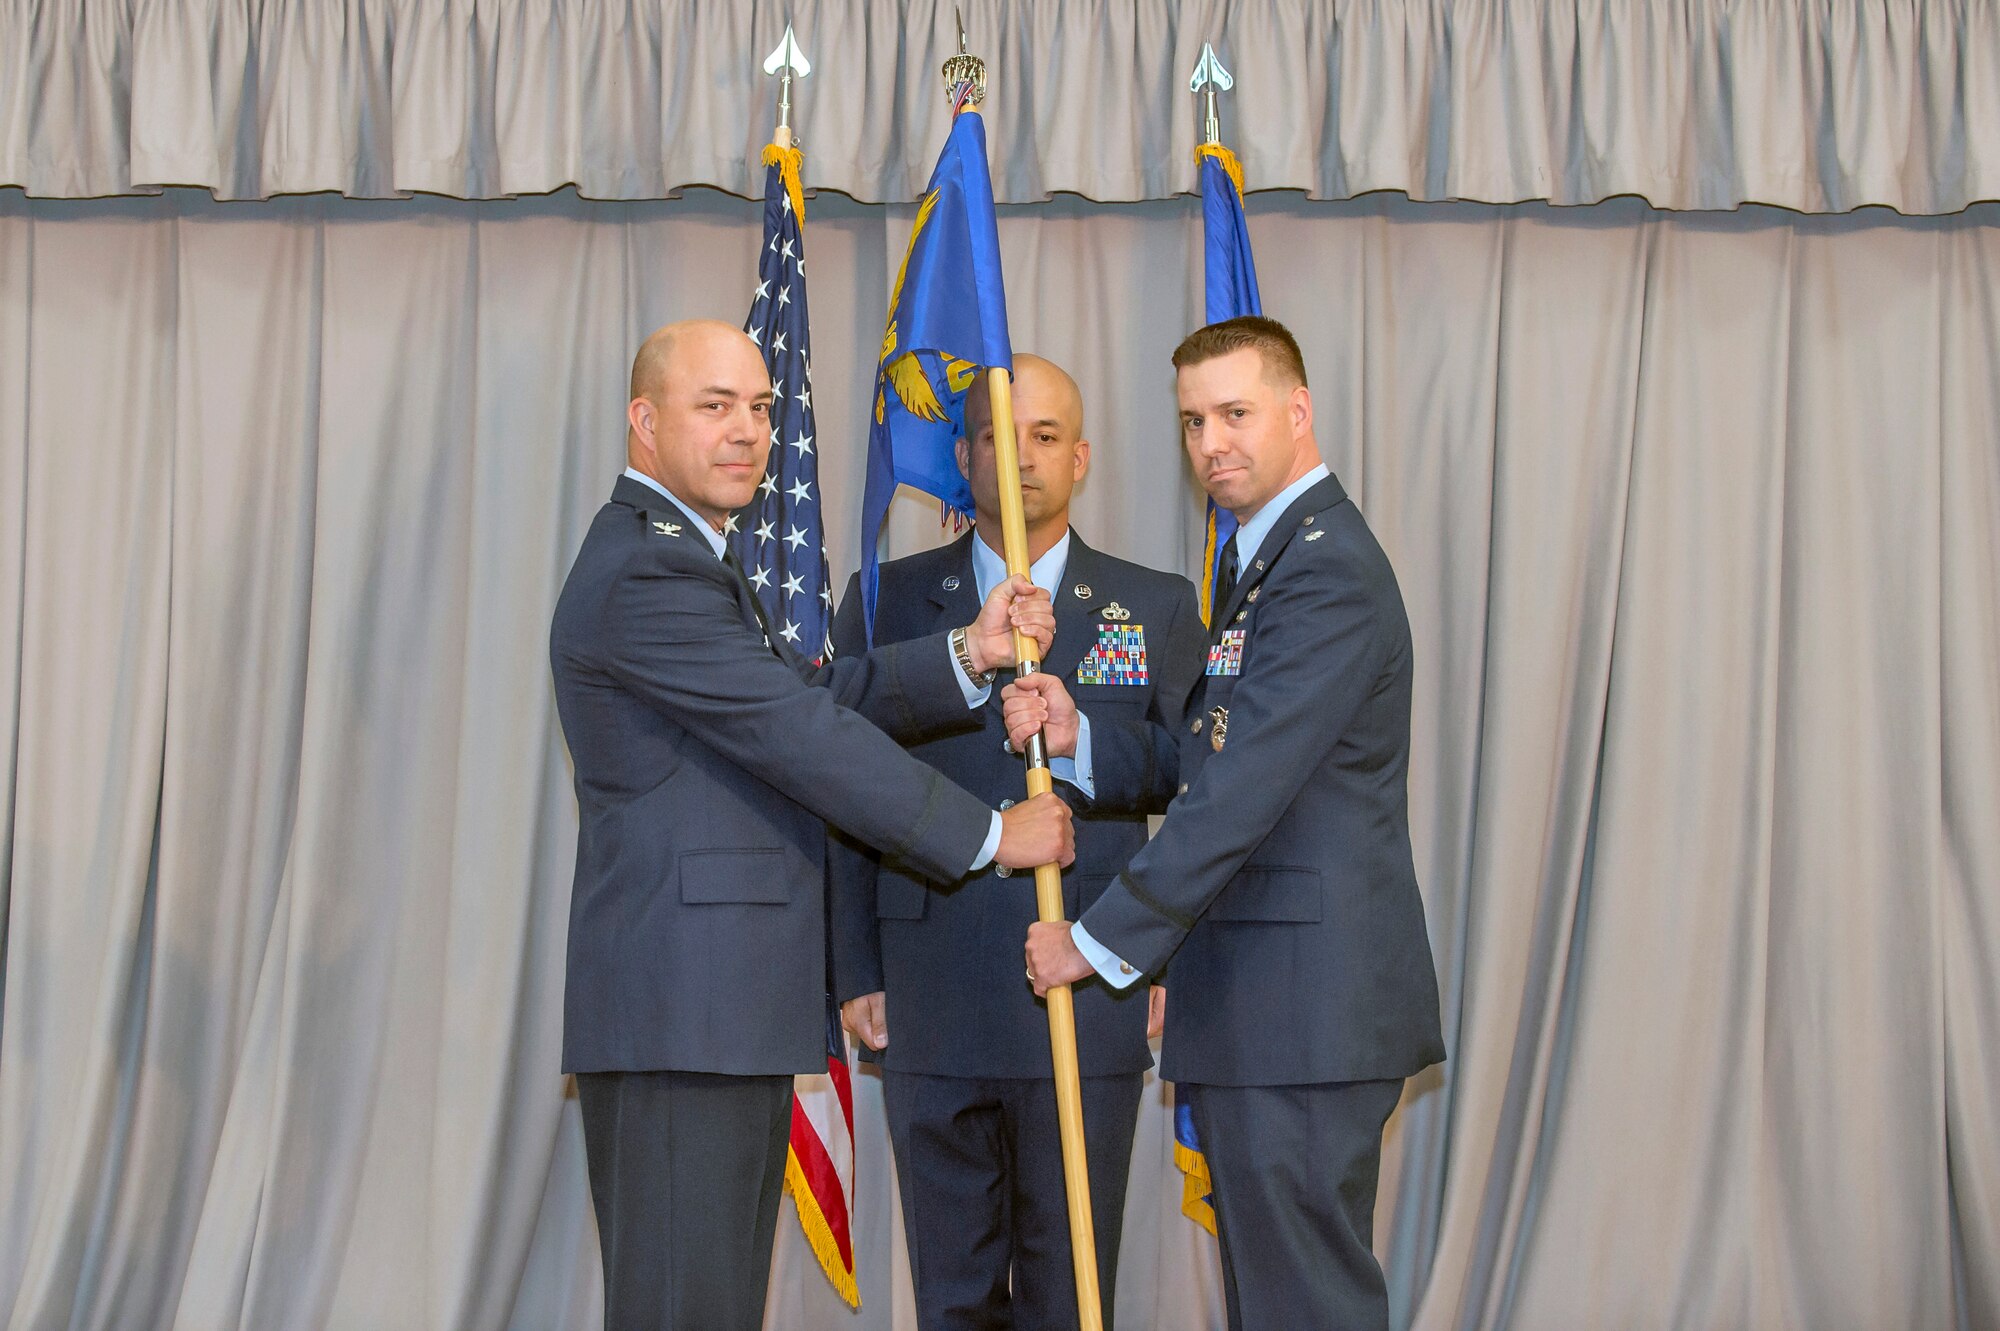 Col. Jeffry Hollman, 412th Mission Support Group commander (left), and new 412th Security Forces Squadron commander, Lt. Col. Joseph Bincarousky, Sr., pose with the squadron’s guidon during an assumption of command ceremony in Club Muroc July 19.  (U.S. Air Force photo by Richard Gonzales)